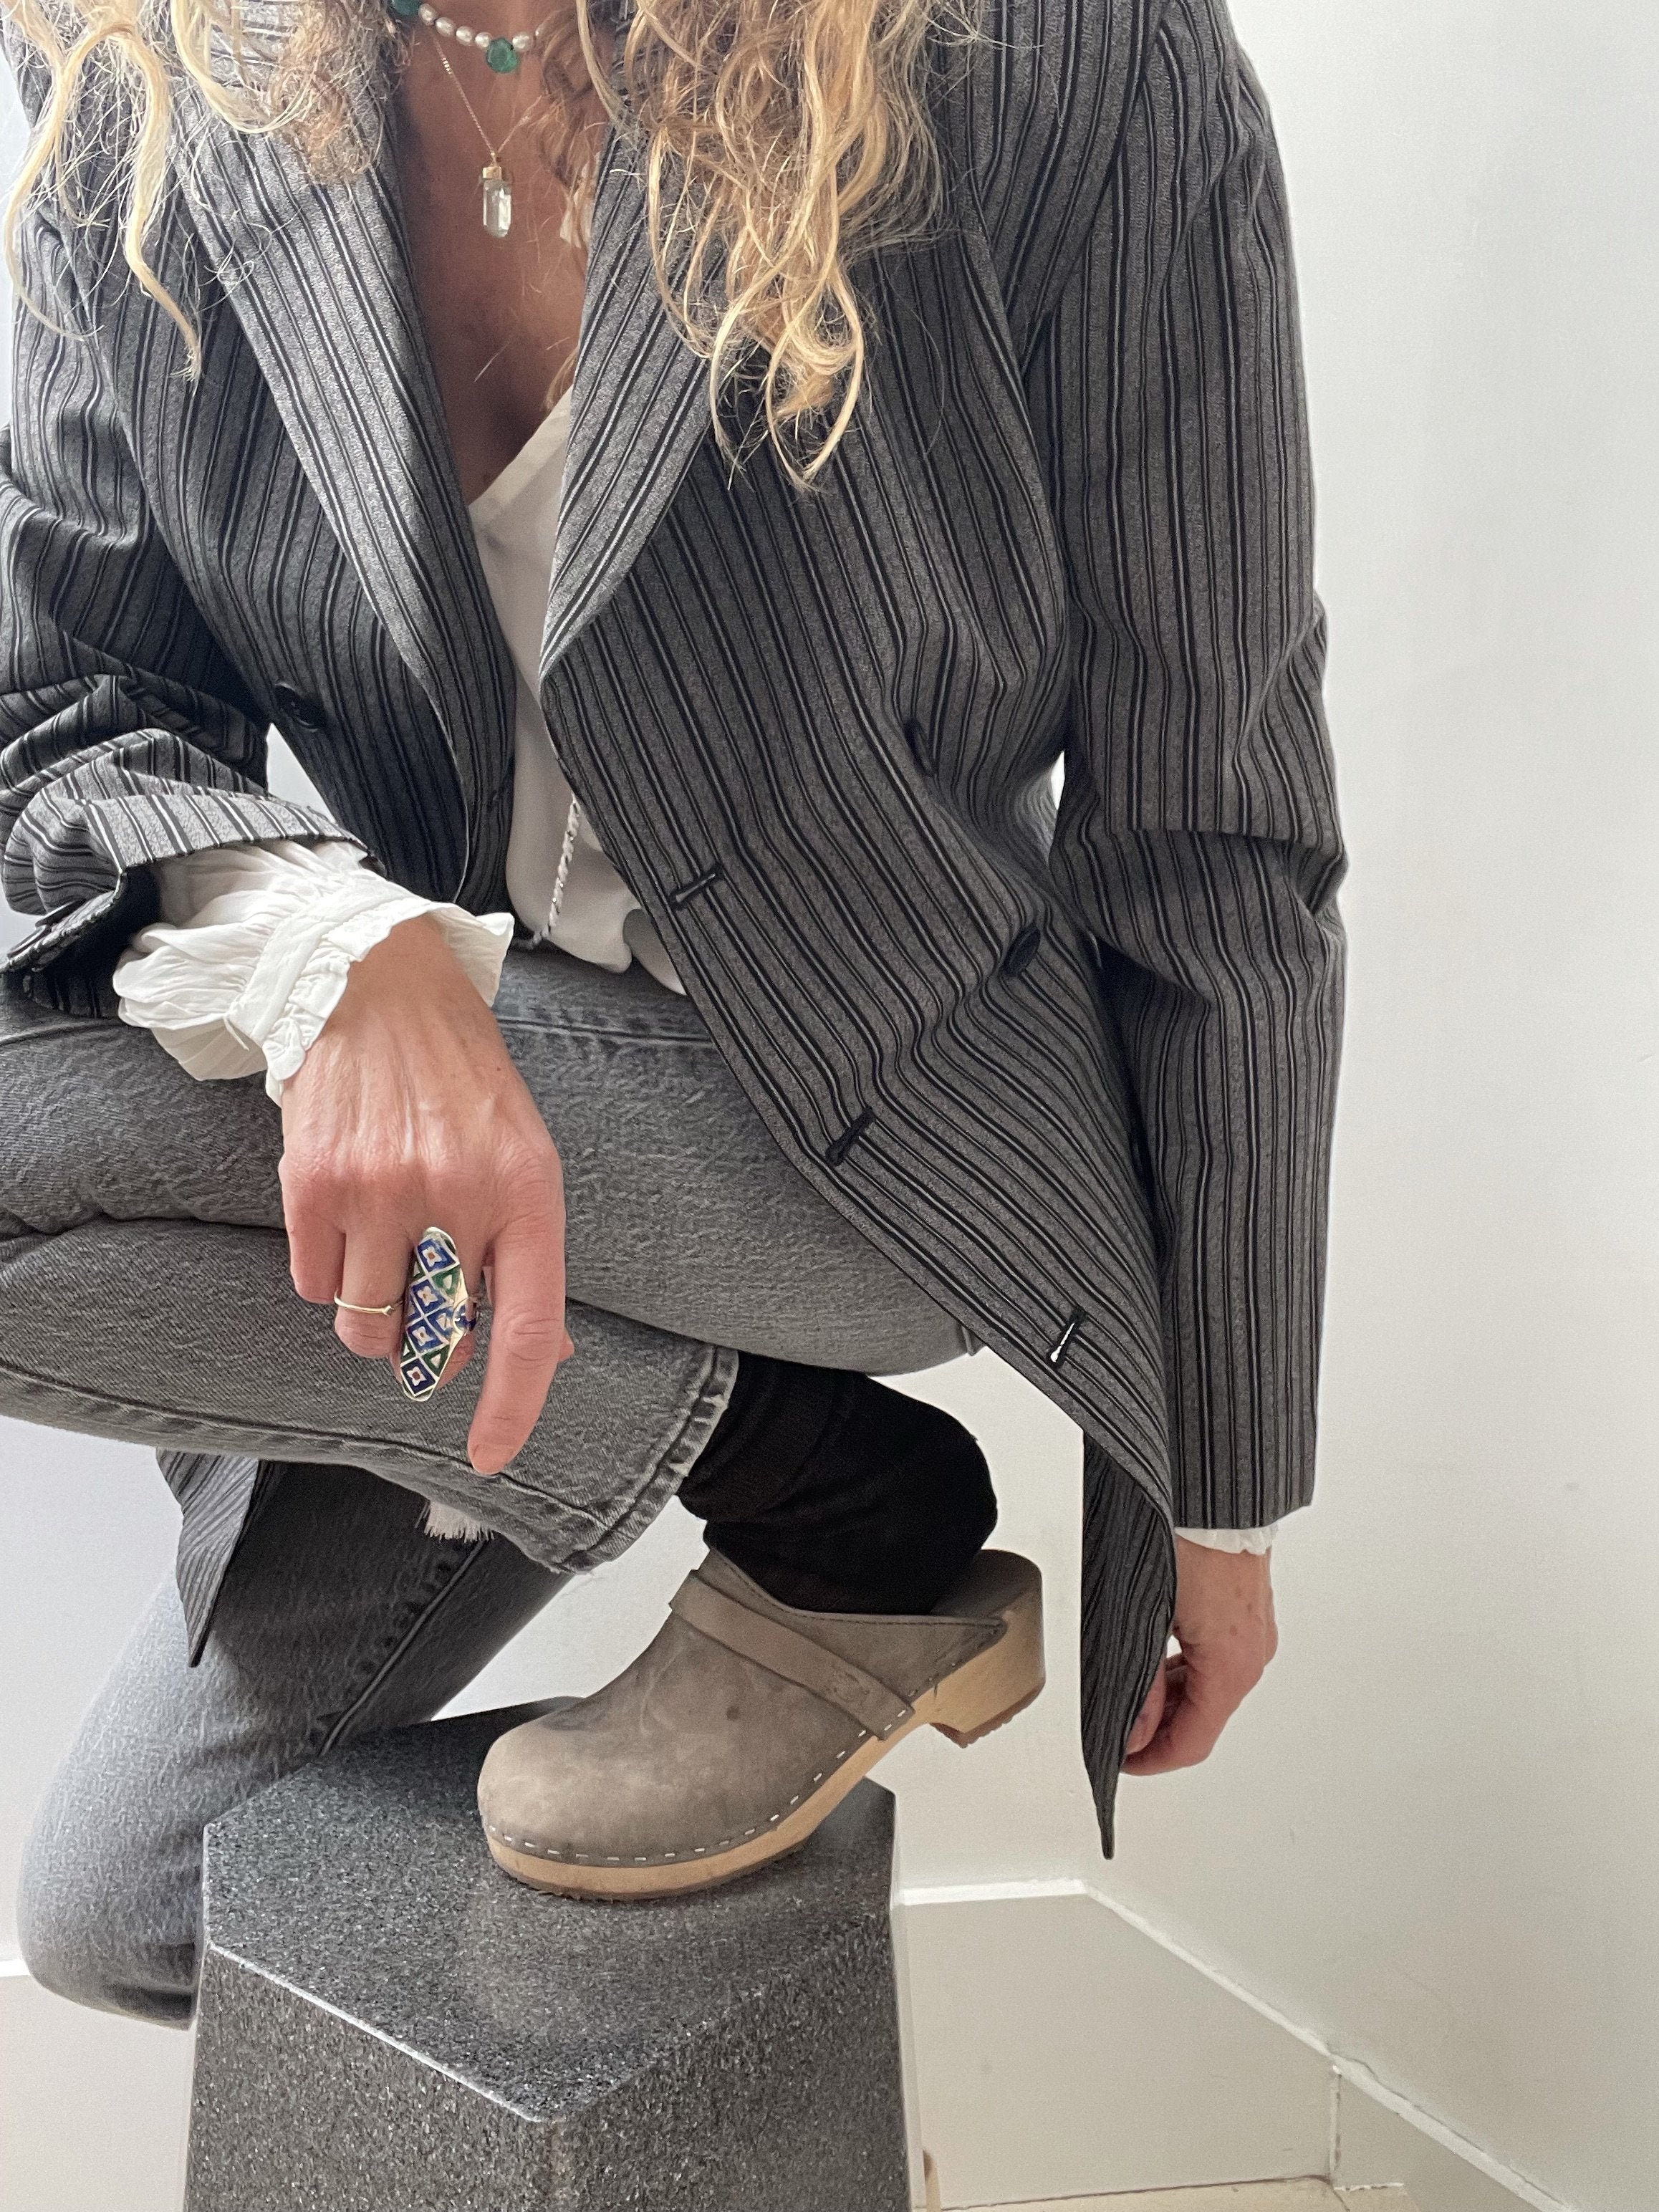 Not specified Jackets Small/Medium Vintage Grey and Black Pinstriped Blazer